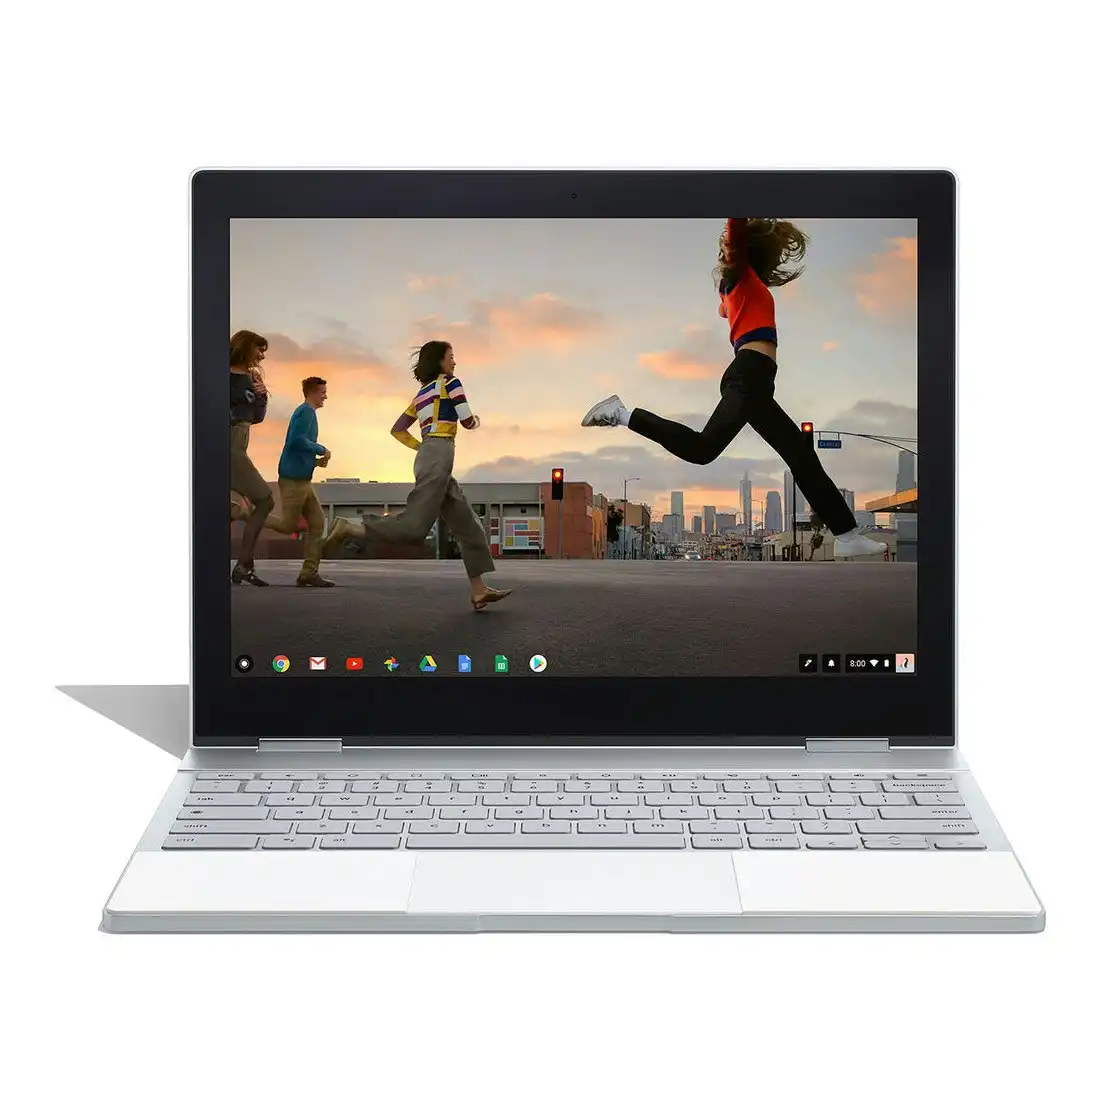 Google Pixelbook Touchscreen 2-in-1 Chromebook (i7, 512GB/16GB, Global Version) Silver [Open Box] - As New